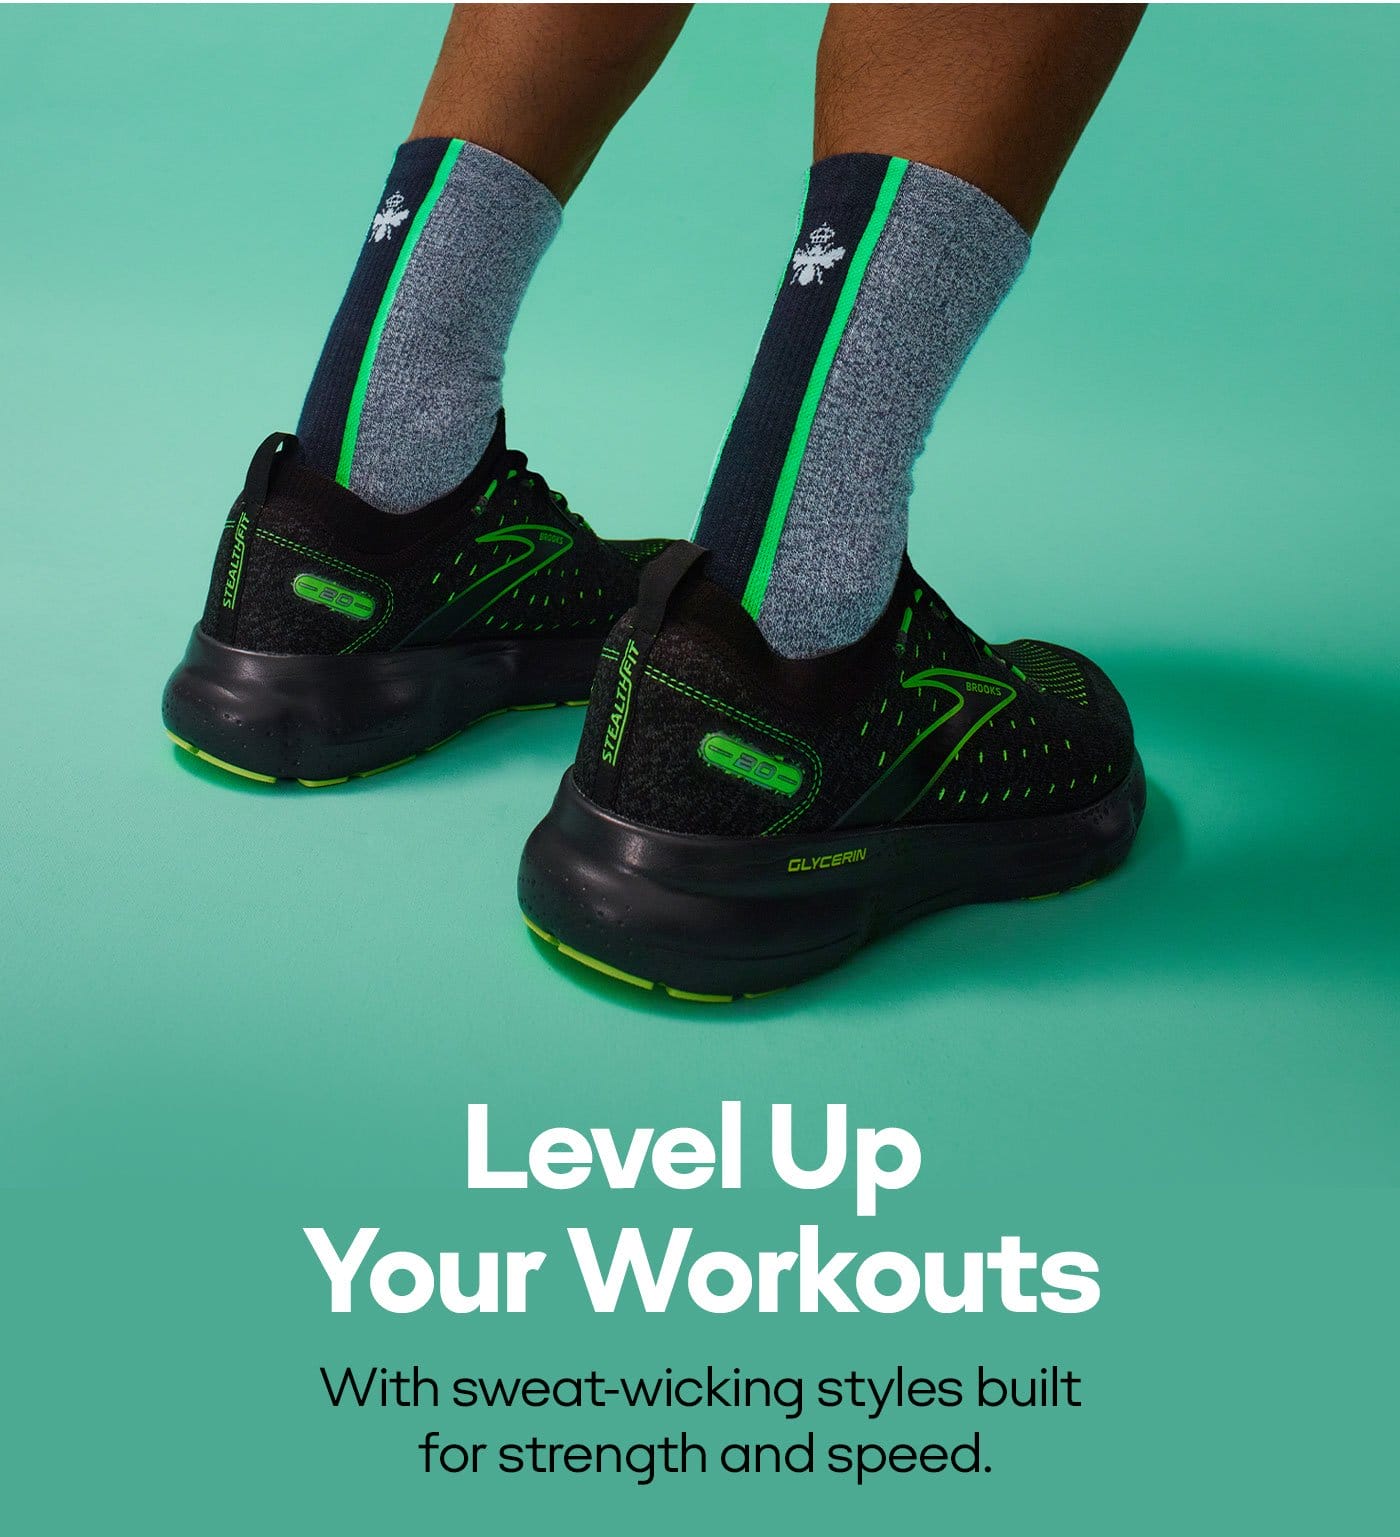  Level Up Your Workouts | With sweat-wicking styles built for strength and speed.